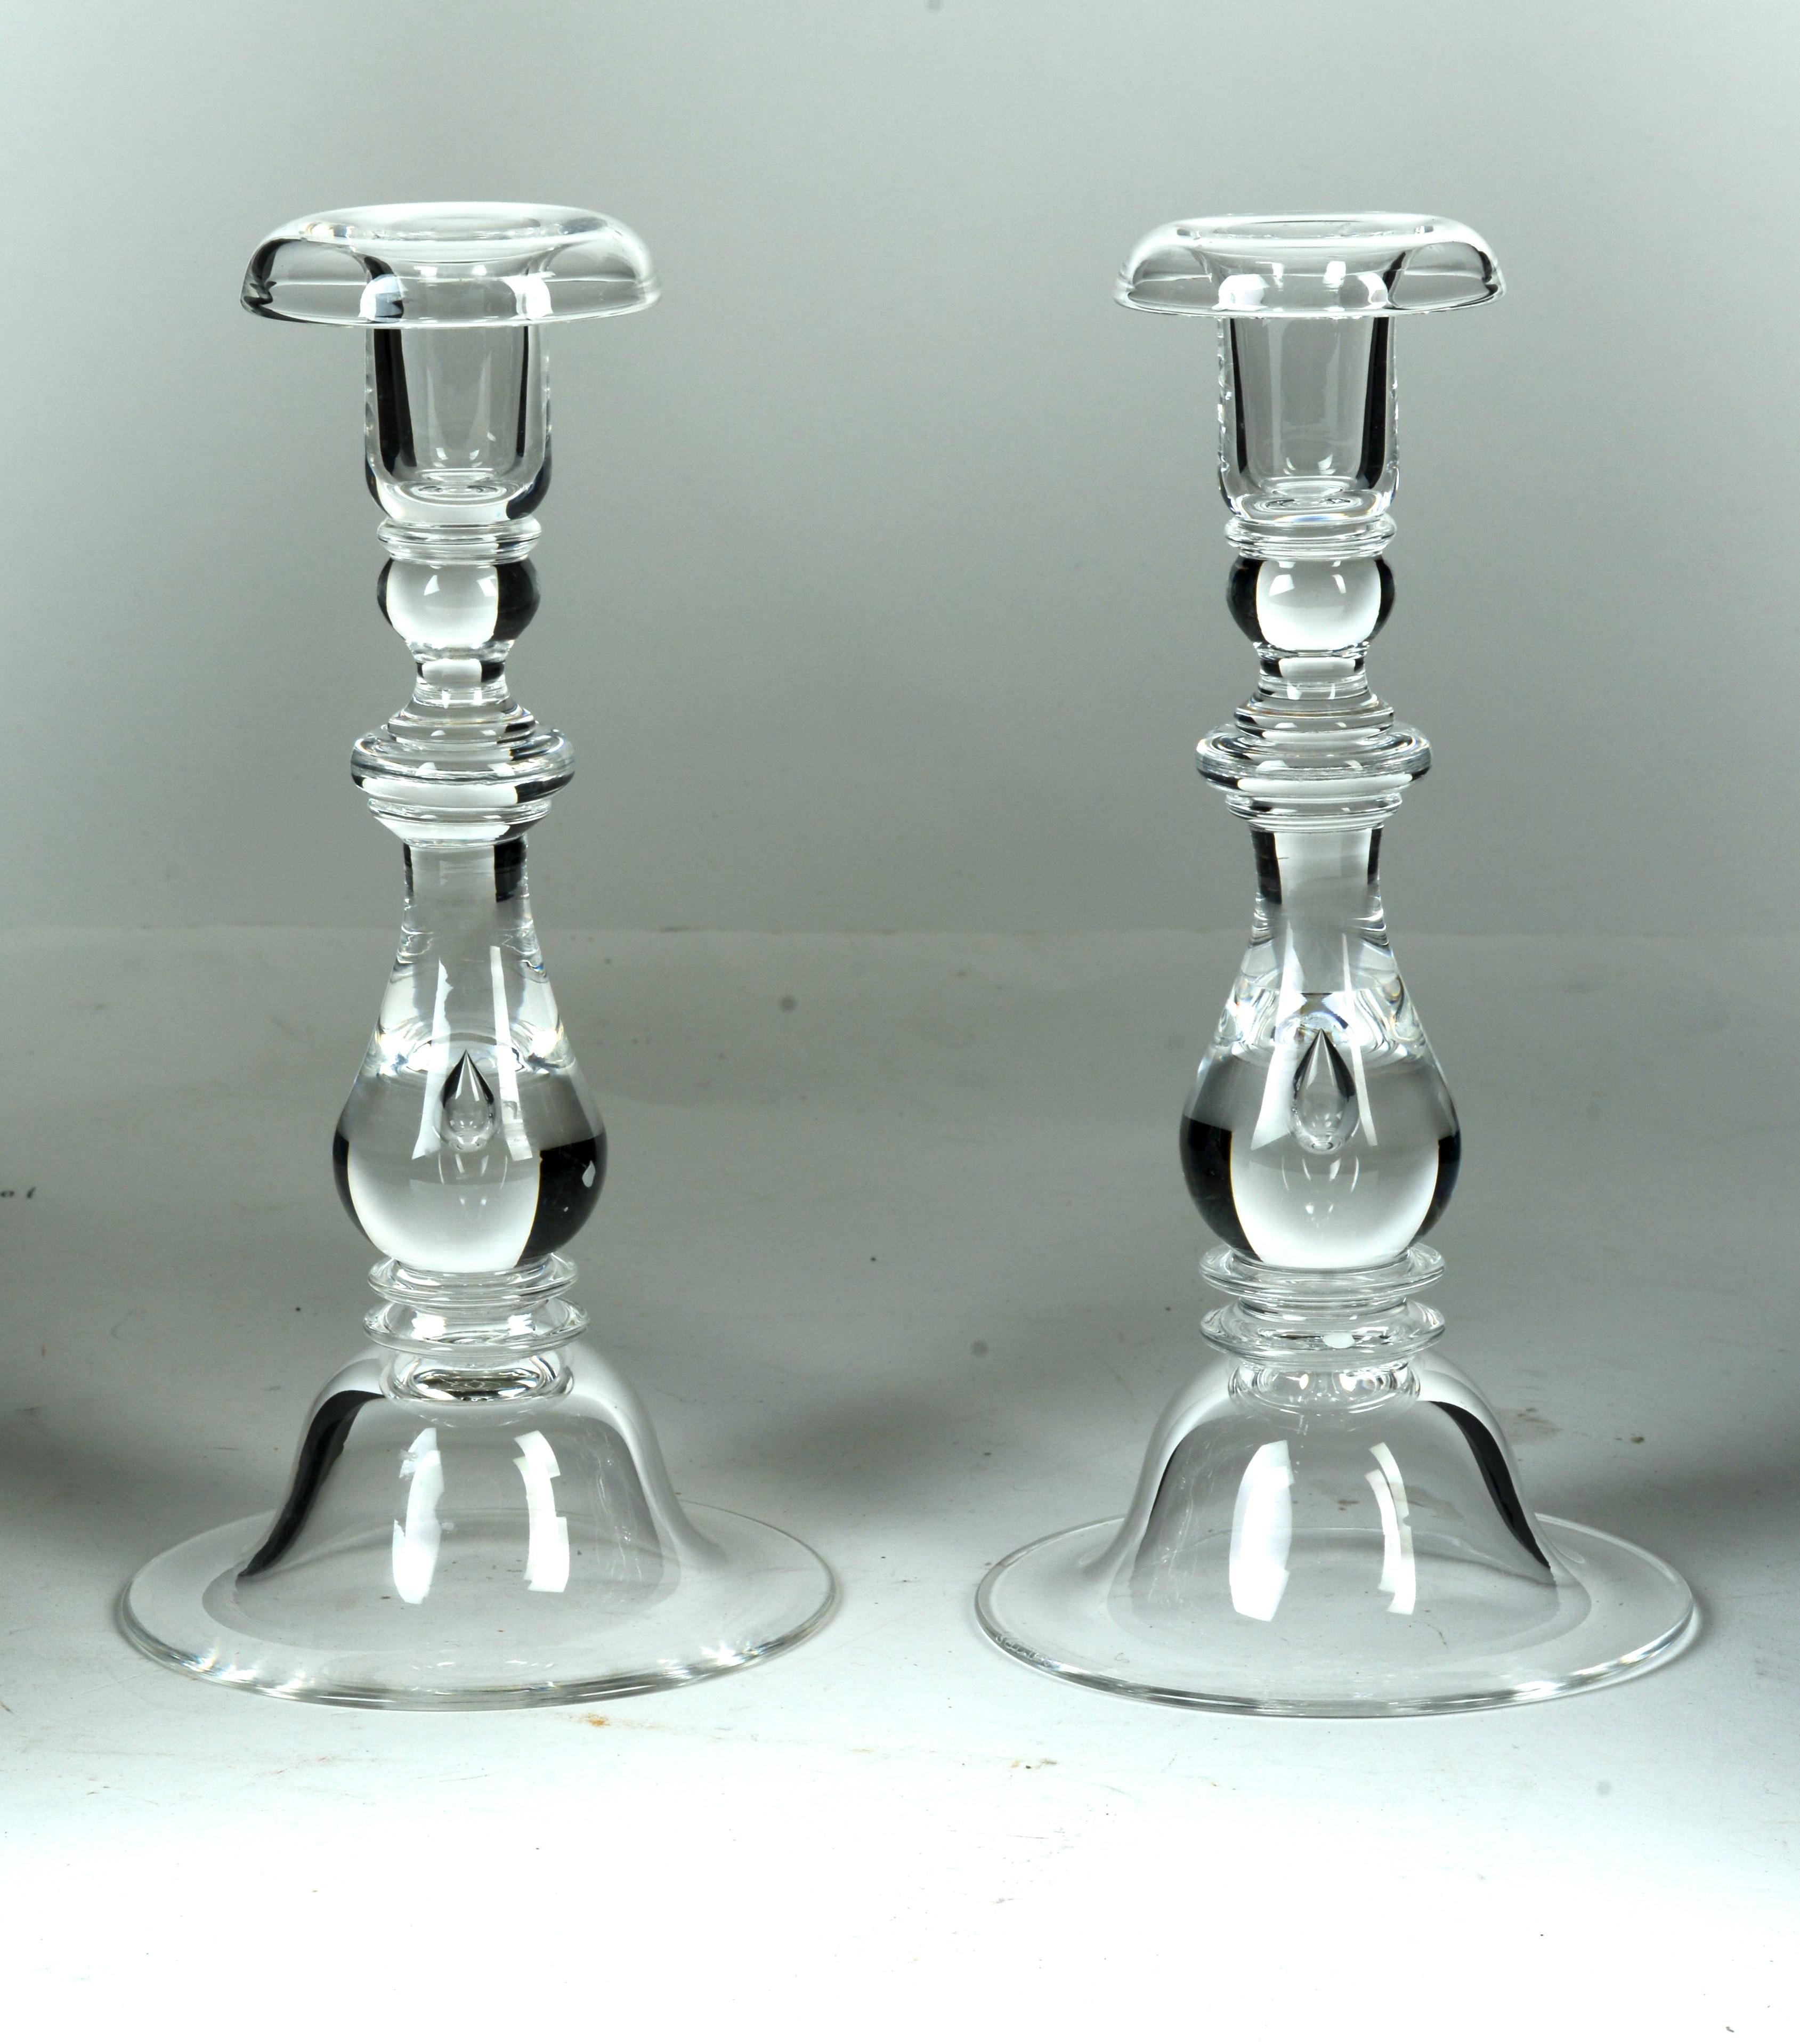 A pair of Steuben baluster candlesticks in the 